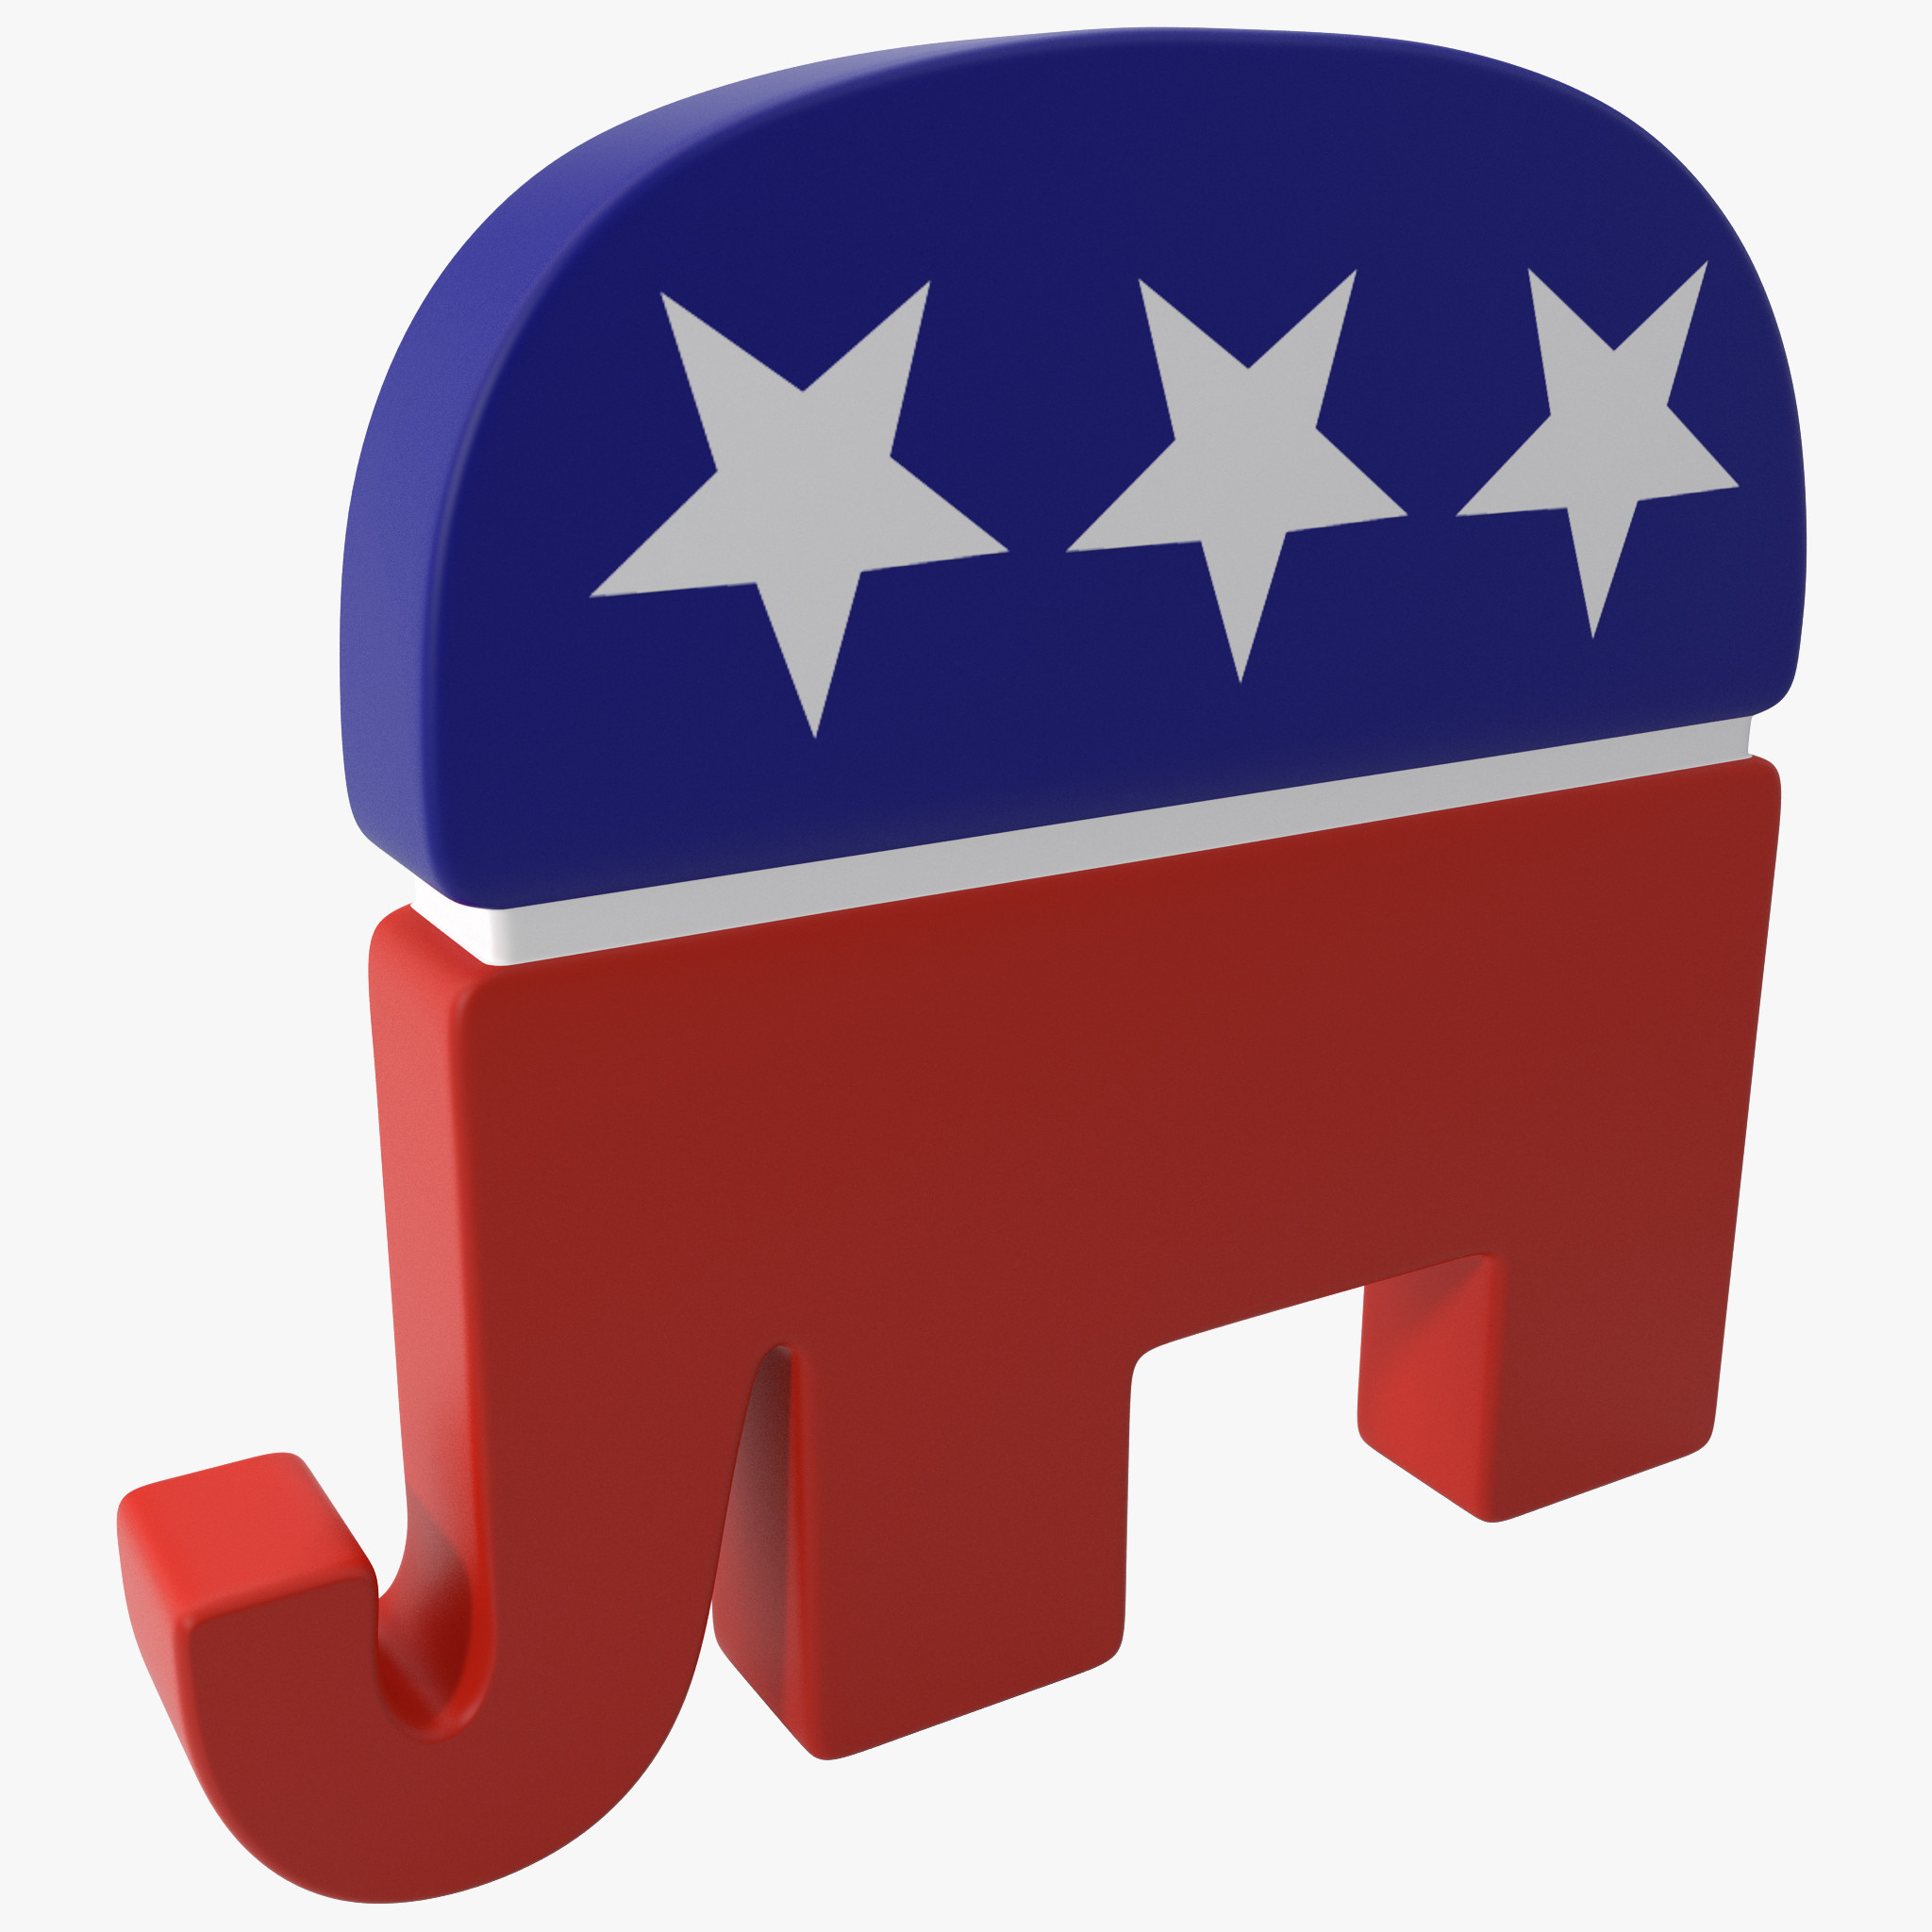 Displaying 18 images for republican party elephant symbol | Chainimage